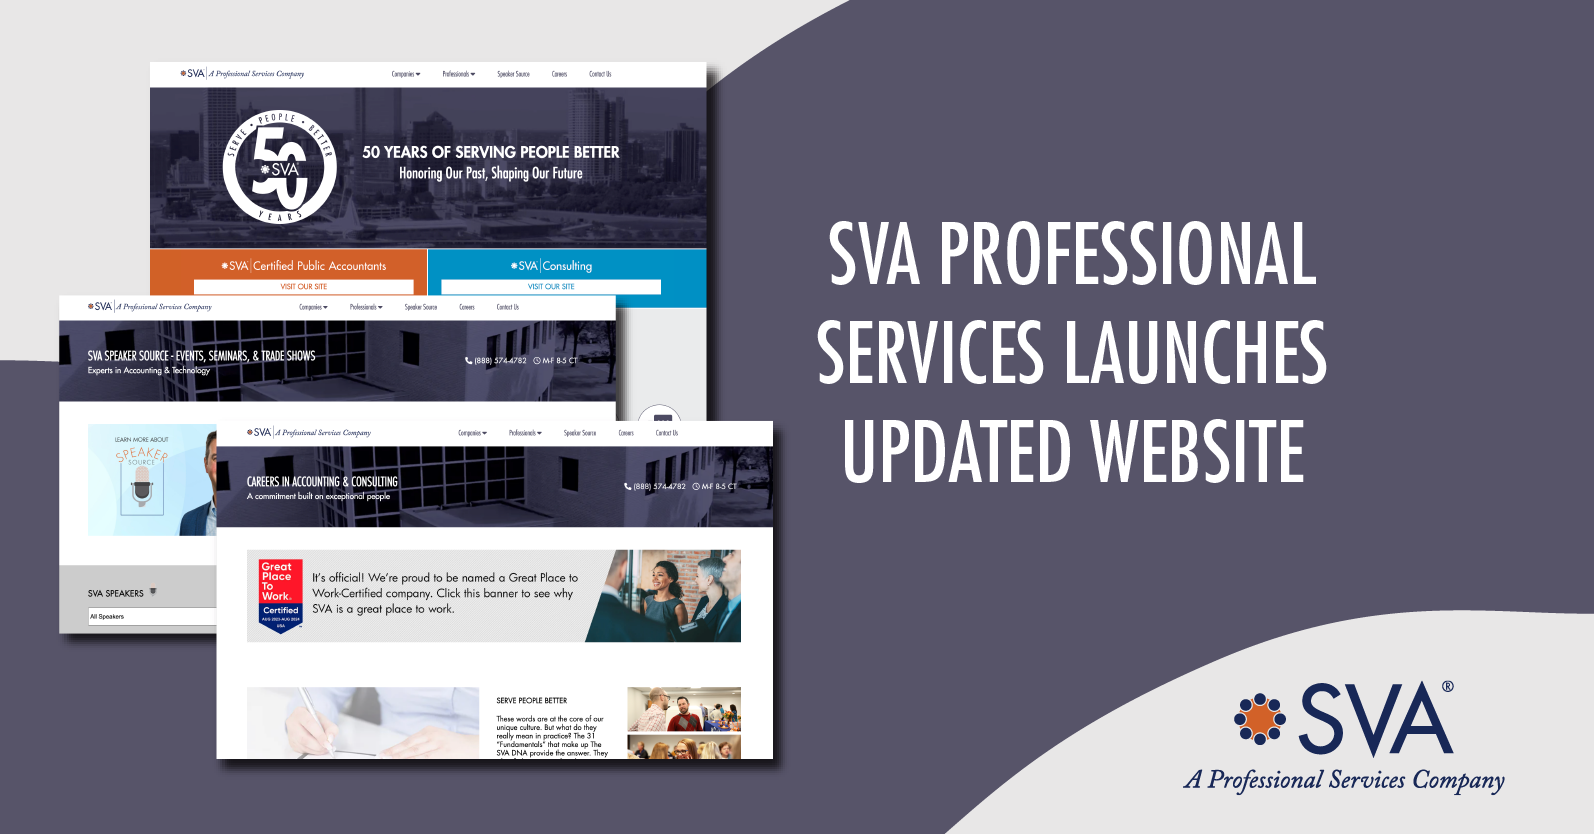 SVA Professional Services Launches Updated Website